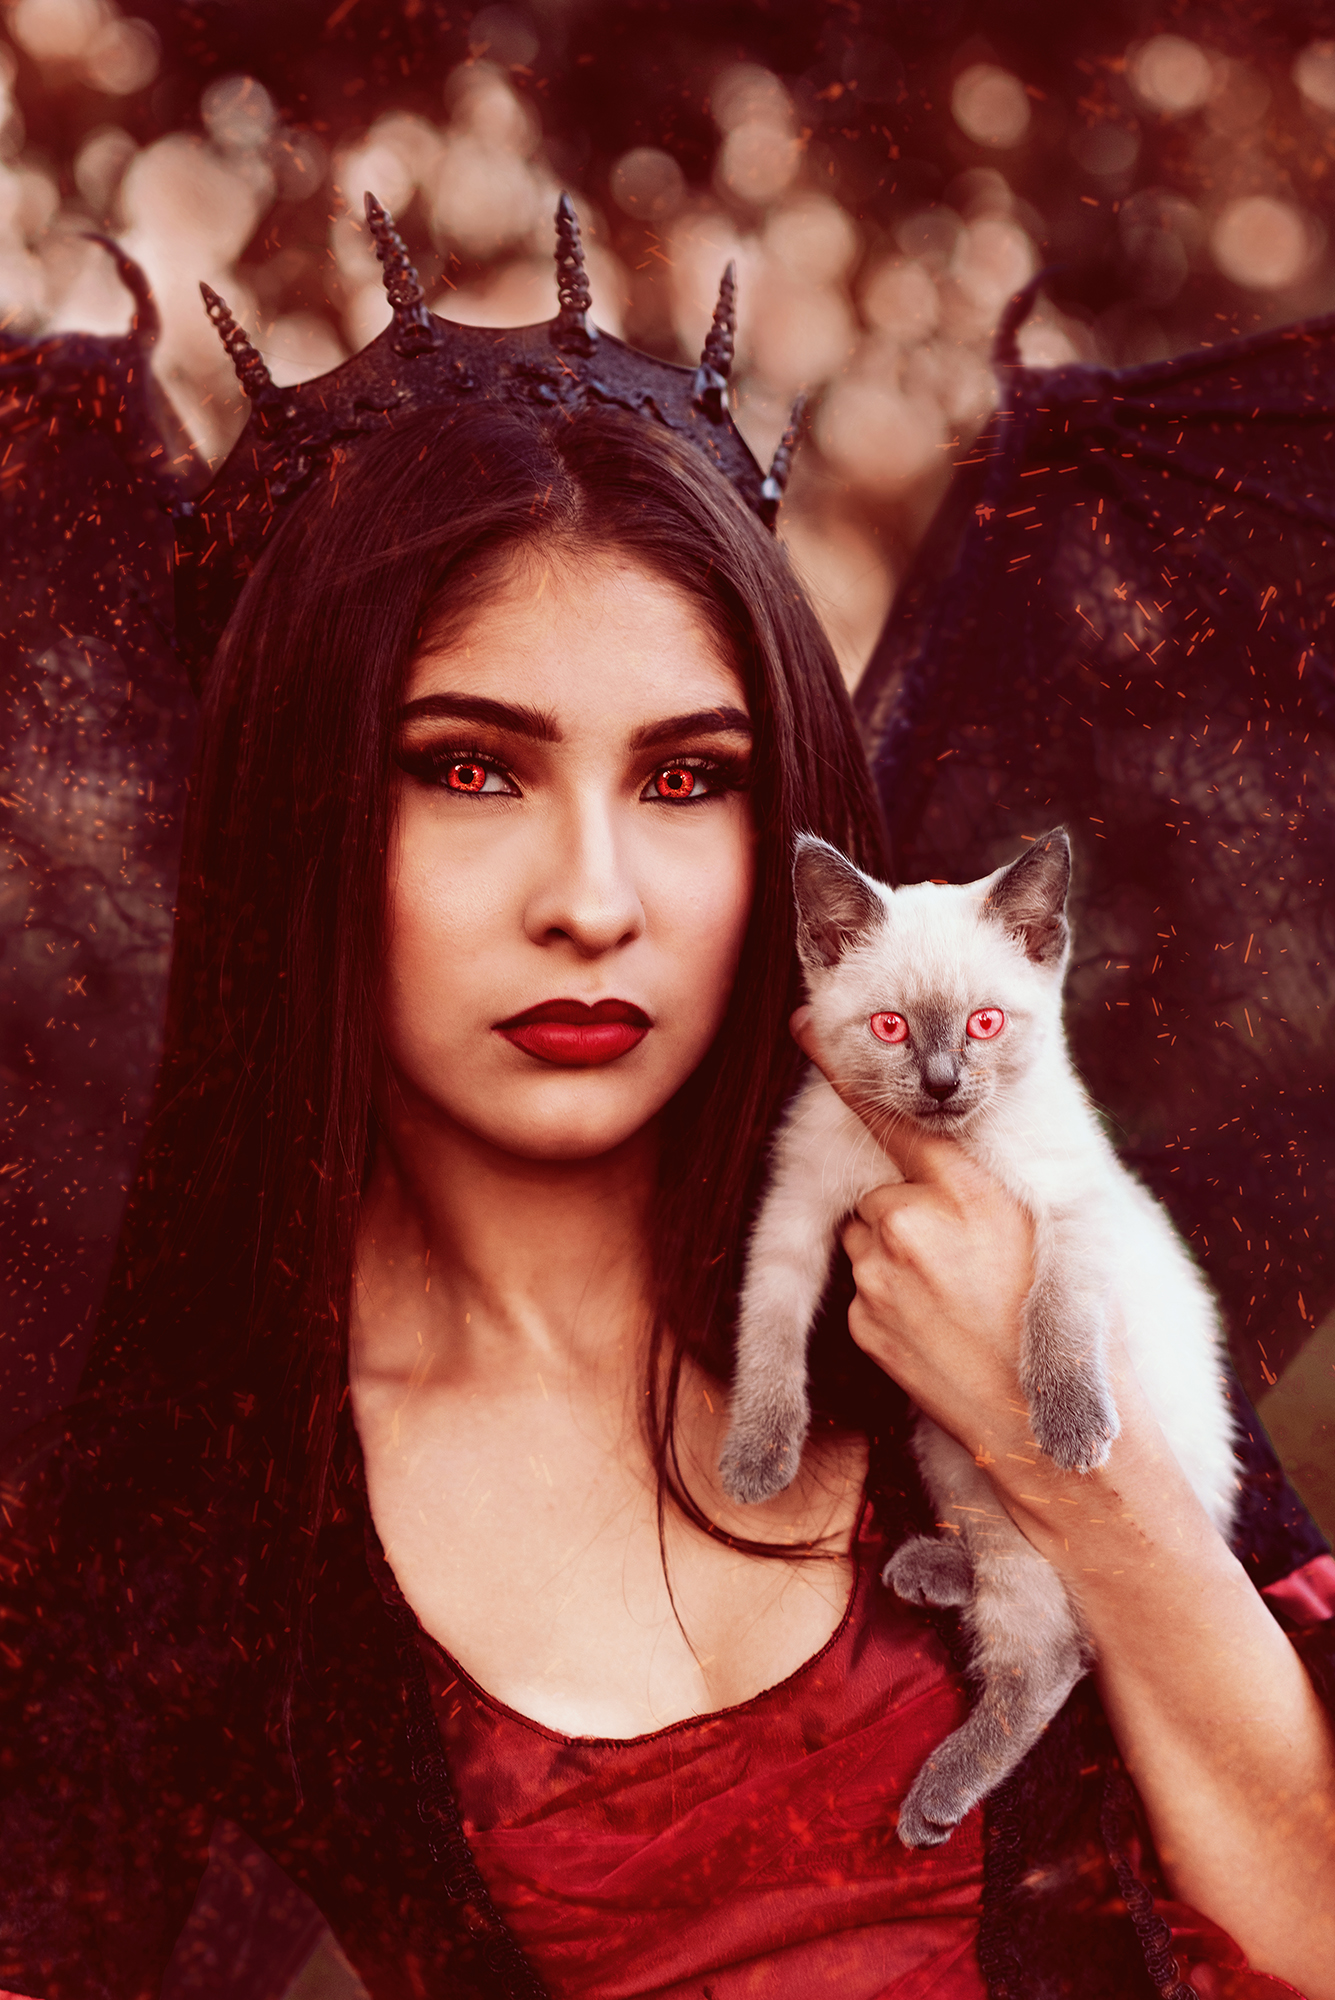 A girl dressed as a demon princess with red eyes and a black crown holds a white and gray kitten with similar red eyes for a fantasy photo shoot by Kendra Colleen Photography in Denver Colorado